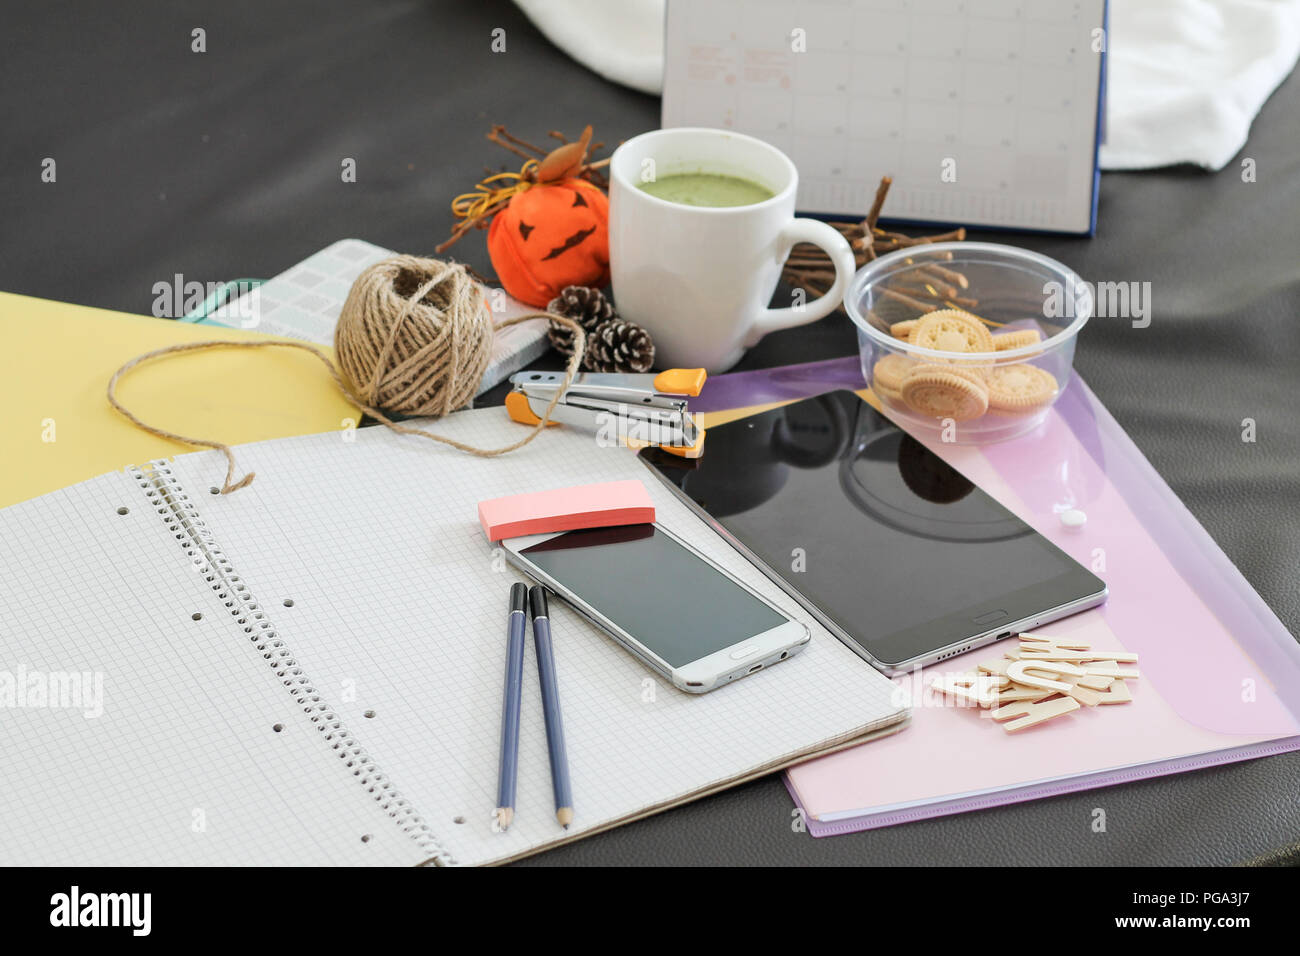 Messy office desk depicting life at a busy office, chasing deadlines and the working millennial life Stock Photo